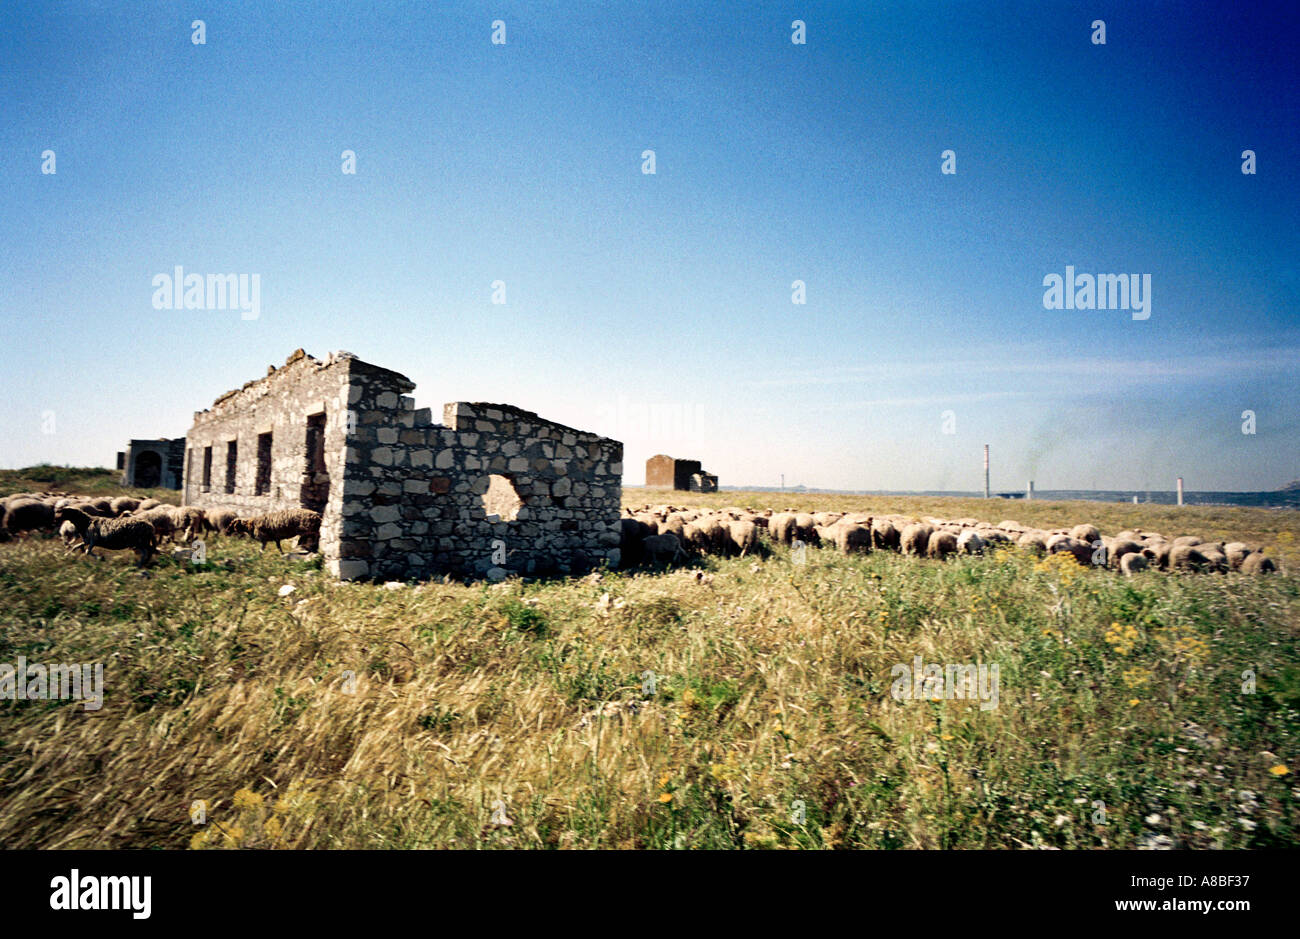 Sheep running though the ruins of military installation from the second world war Magnisi peninsula Sicily Stock Photo